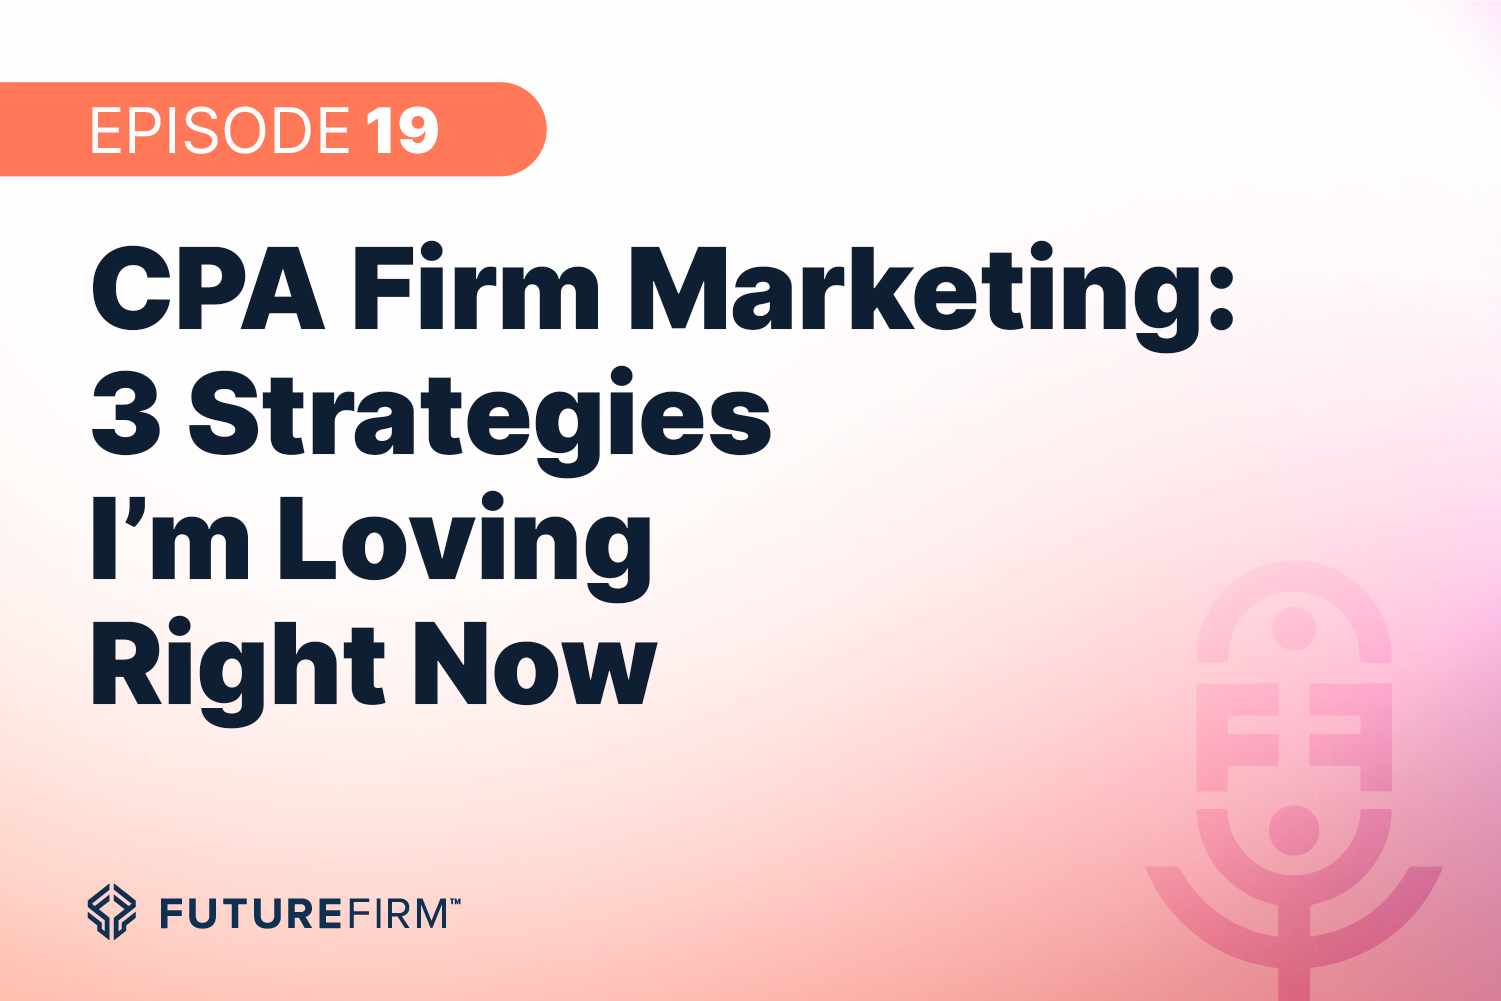 CPA Firm Marketing: 3 Strategies I’m Loving Right Now